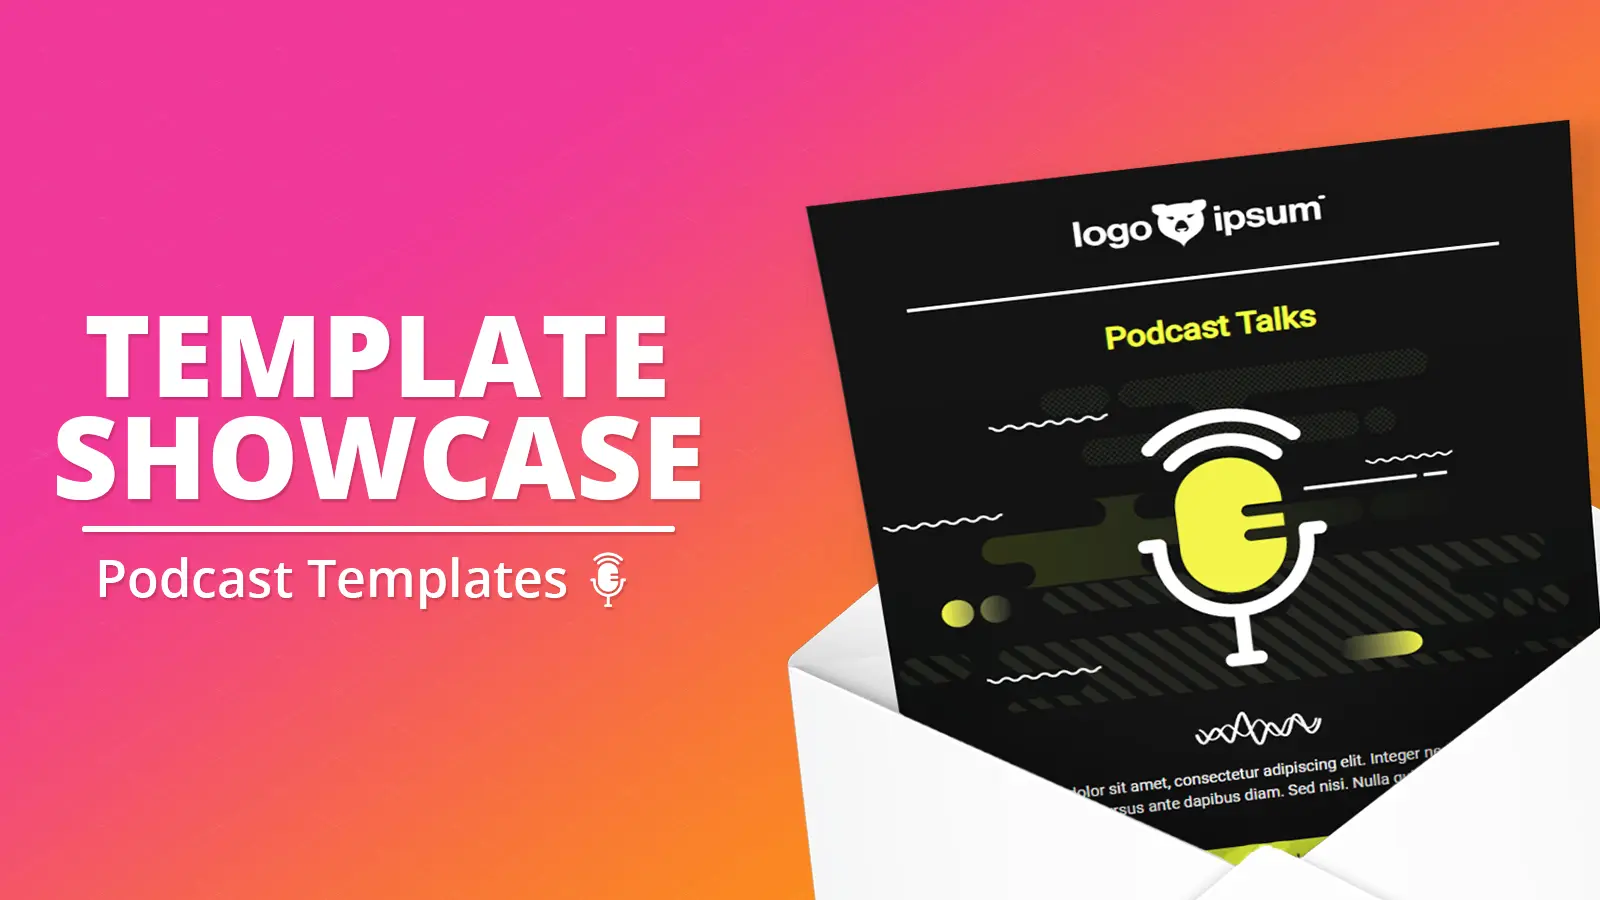 Template showcase: Podcast template